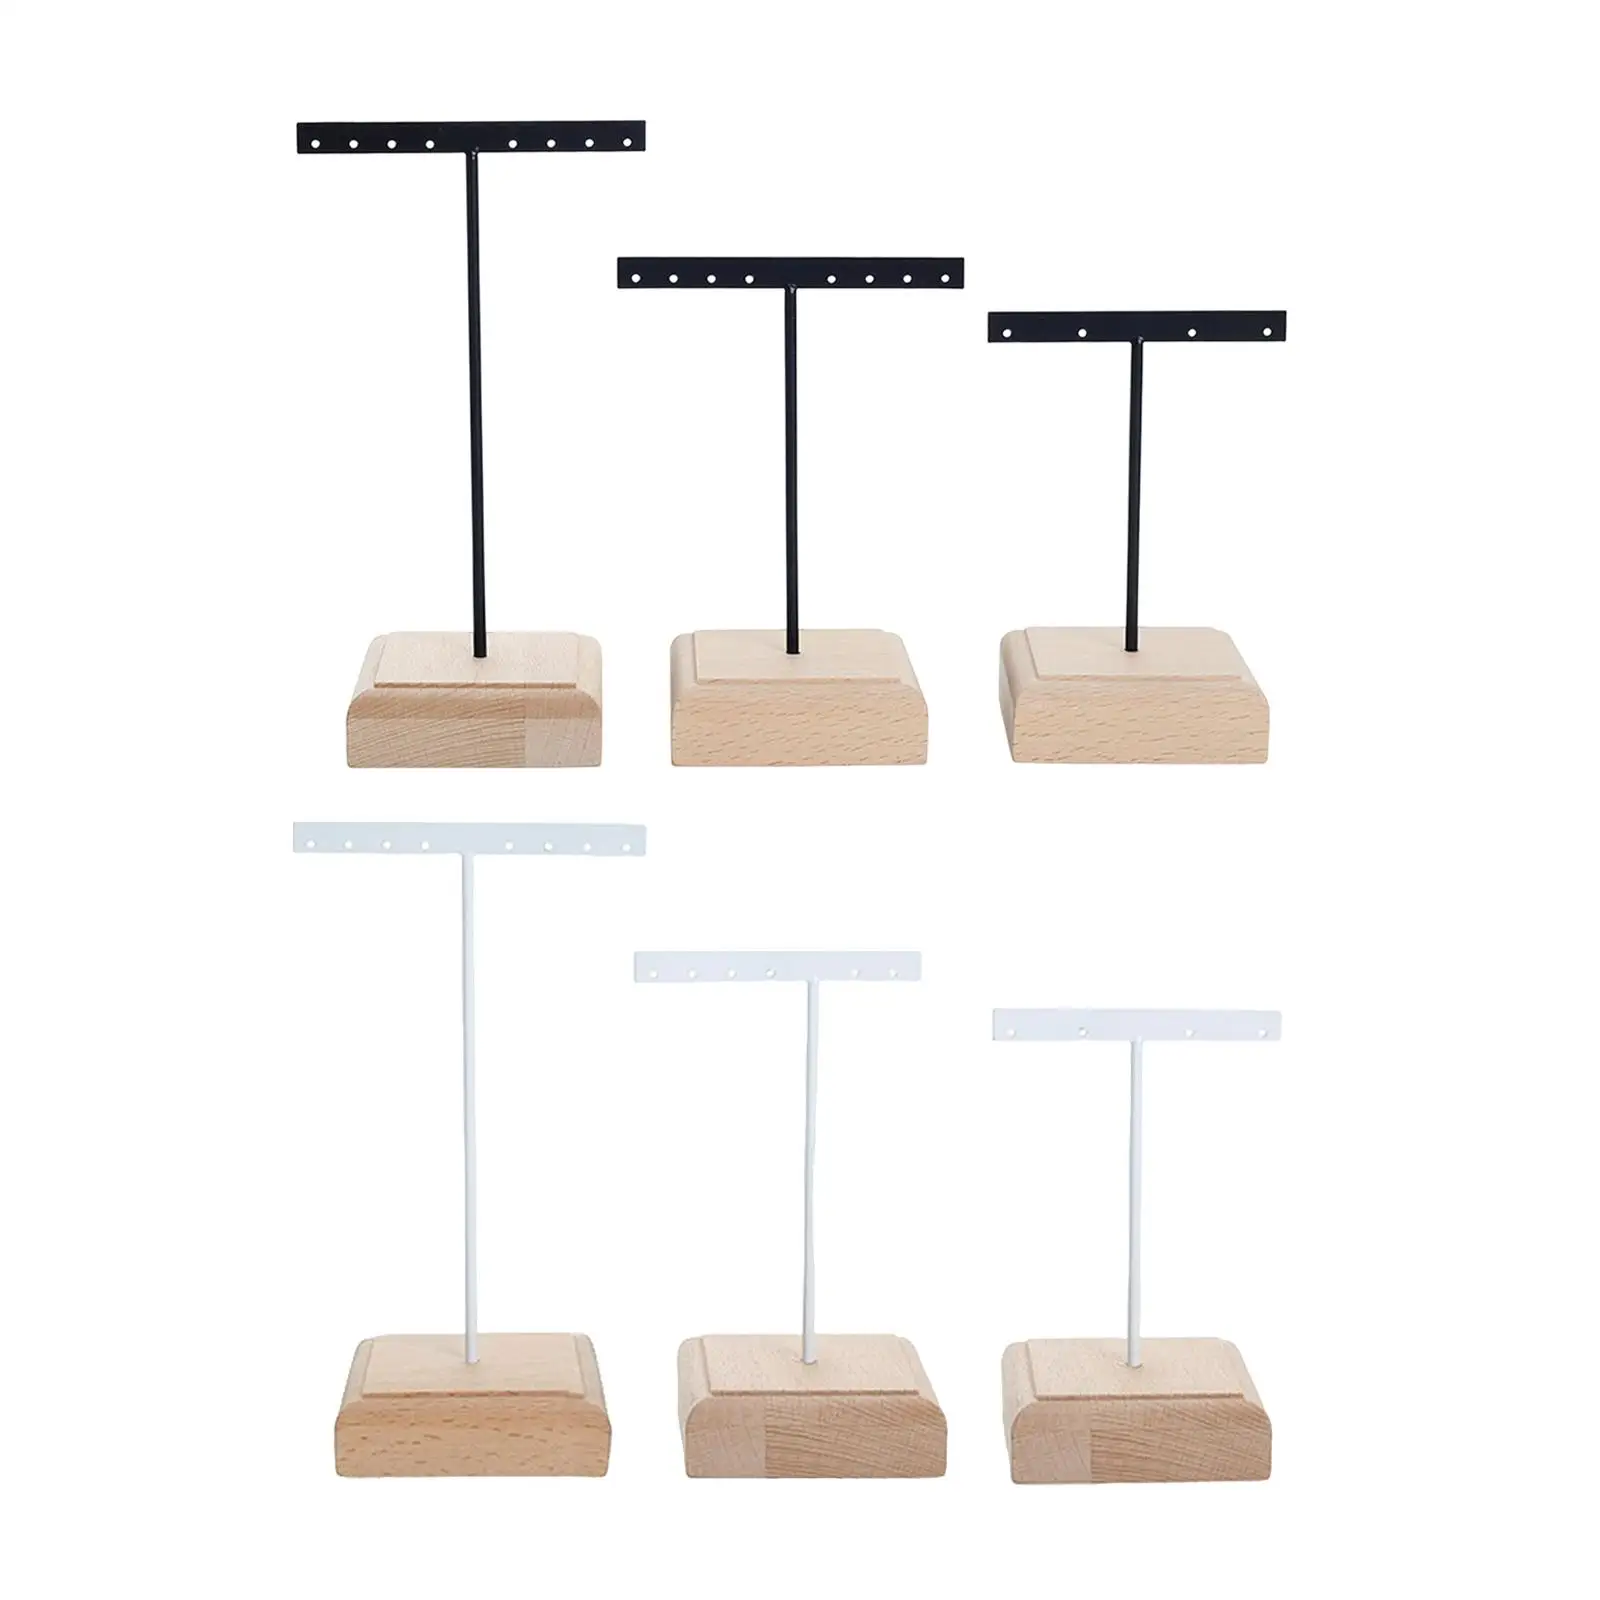 

3Pcs T Bar Earrings Display Stand Wooden Base Jewelry Organizer Hanging Rack for Necklaces Bangles Shops Selling Retail Showcase